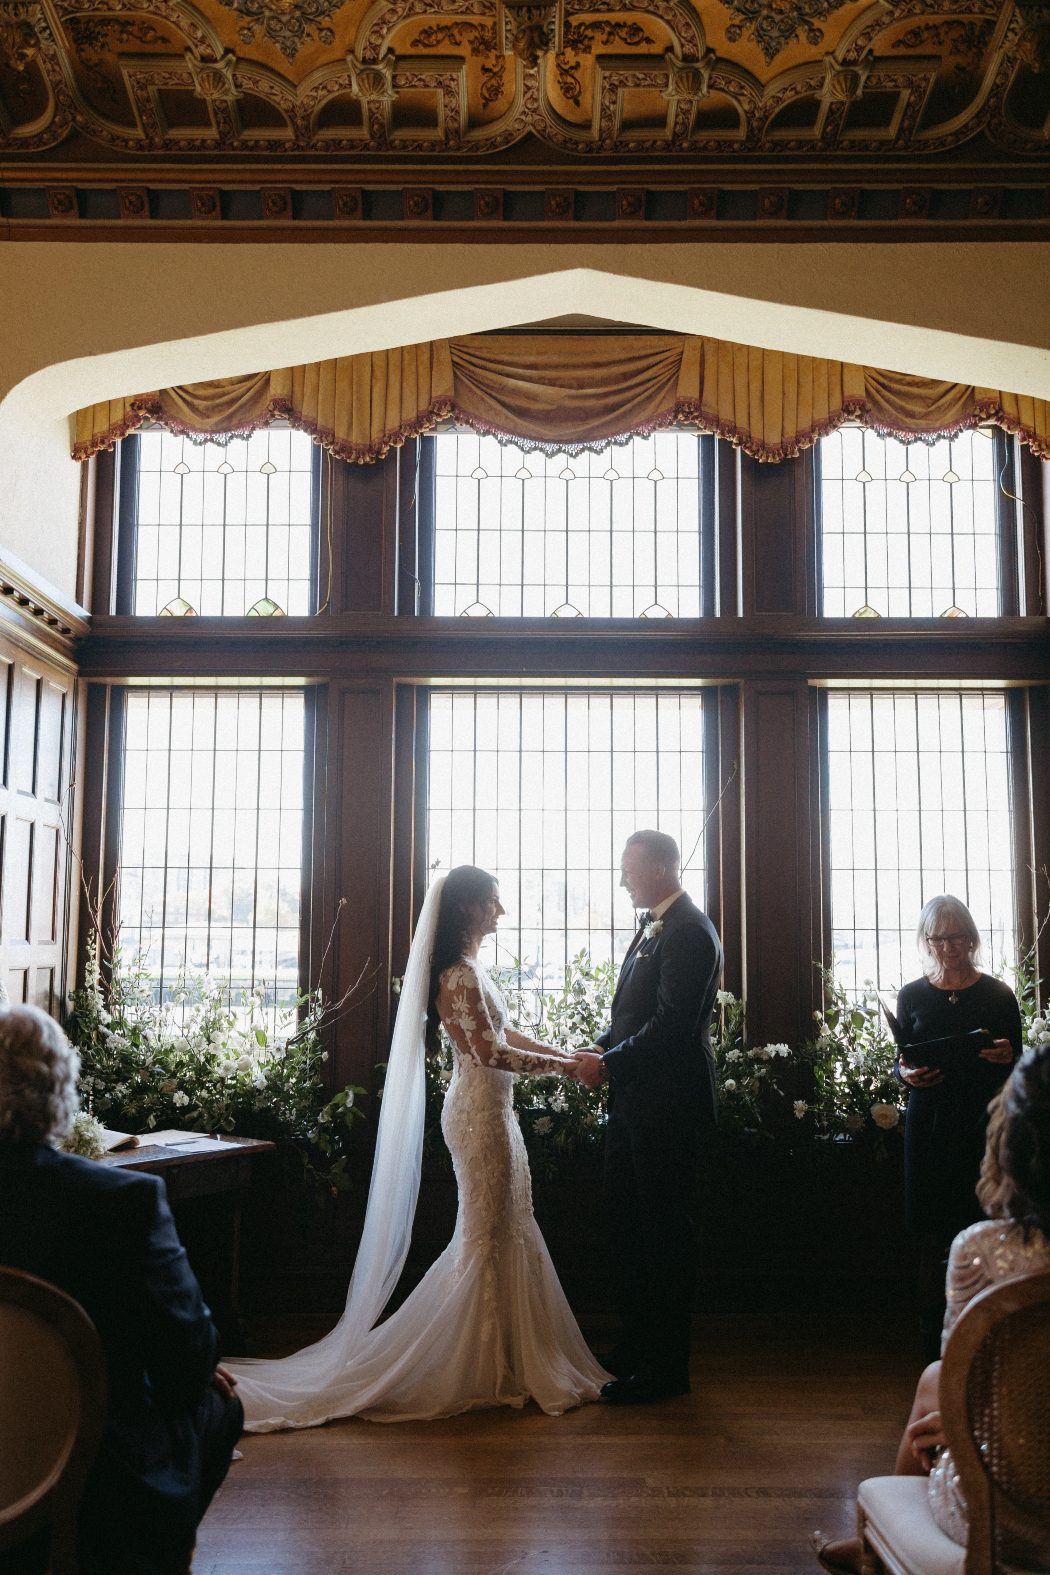 Stephanie and Tanner stand clasping hands in front of the large windows and floral arrangements, ready to say 'I do'.